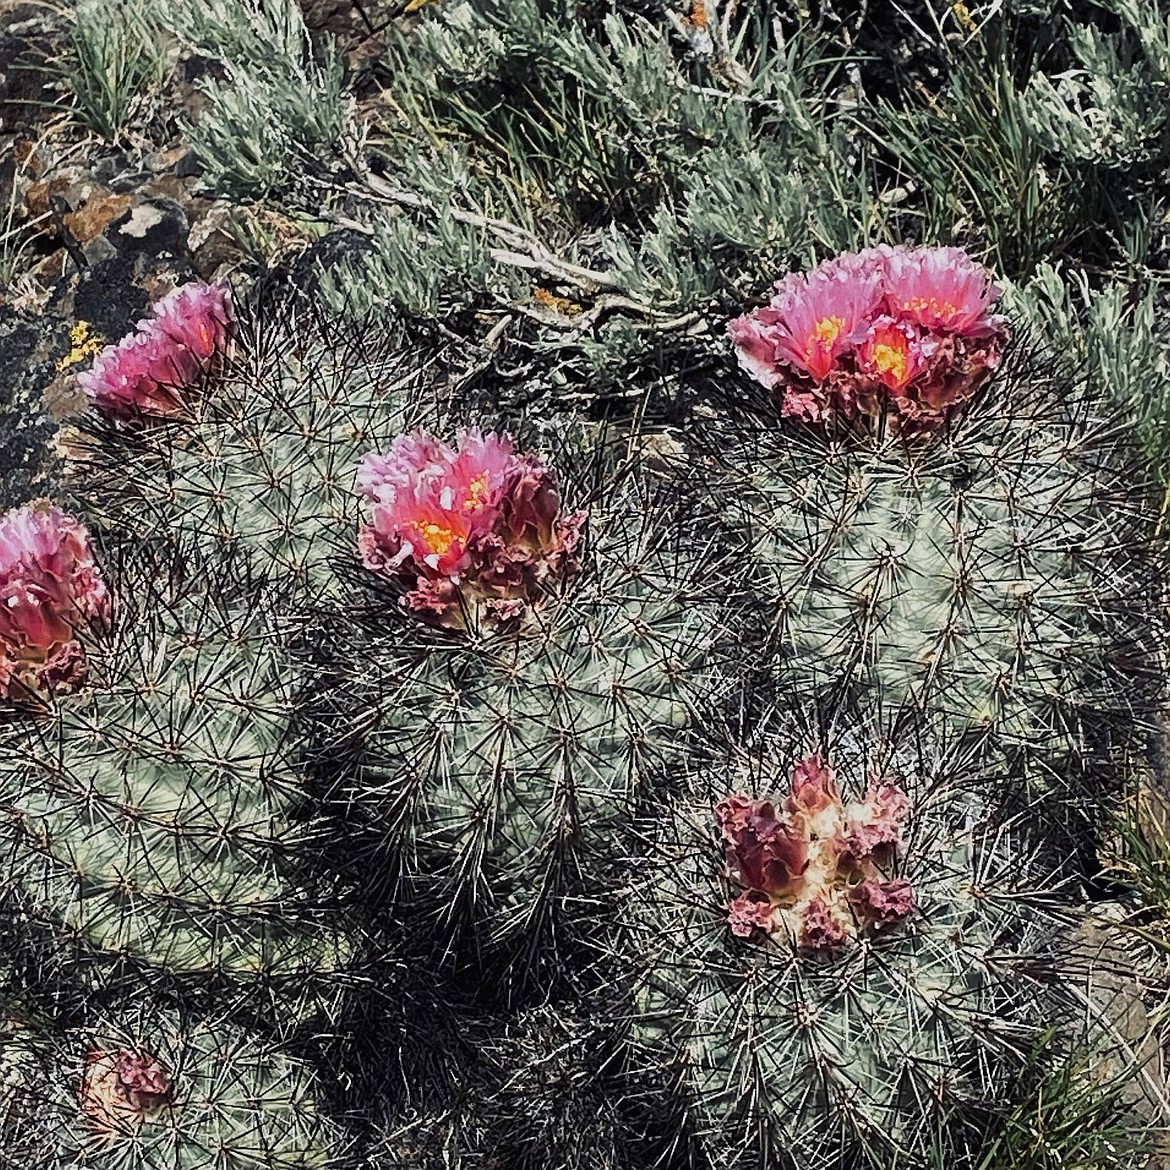 Cactus flowers bloom near Quincy on a QVHSM tour of desert flora and fauna in 2023. The first tour of 2024 is scheduled for April.